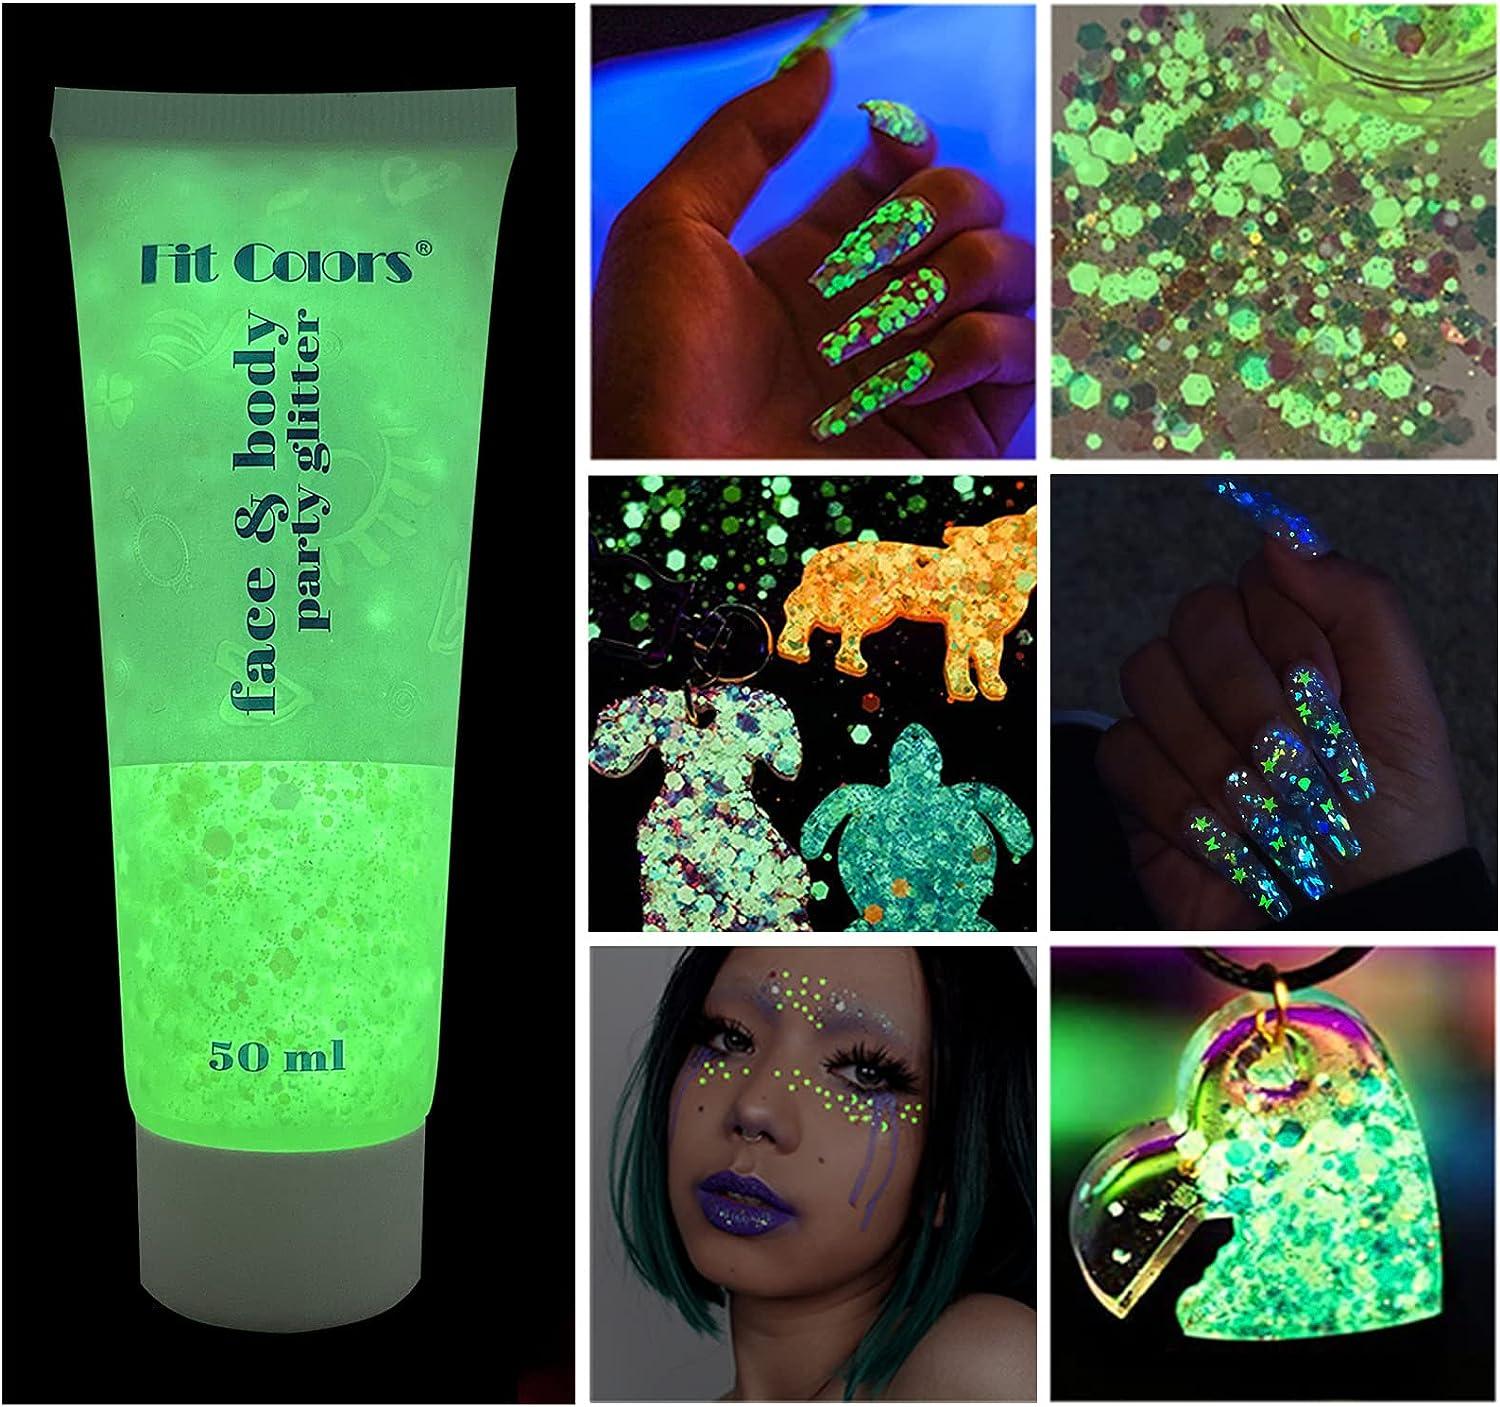 quckangy Glow in The Dark Body Face Glitter Gel 12 Colors Chunky Glitter for Nails High Luminous Iridescent Glitter Cosmetic Eyeshadow Loose Glow Glitter for